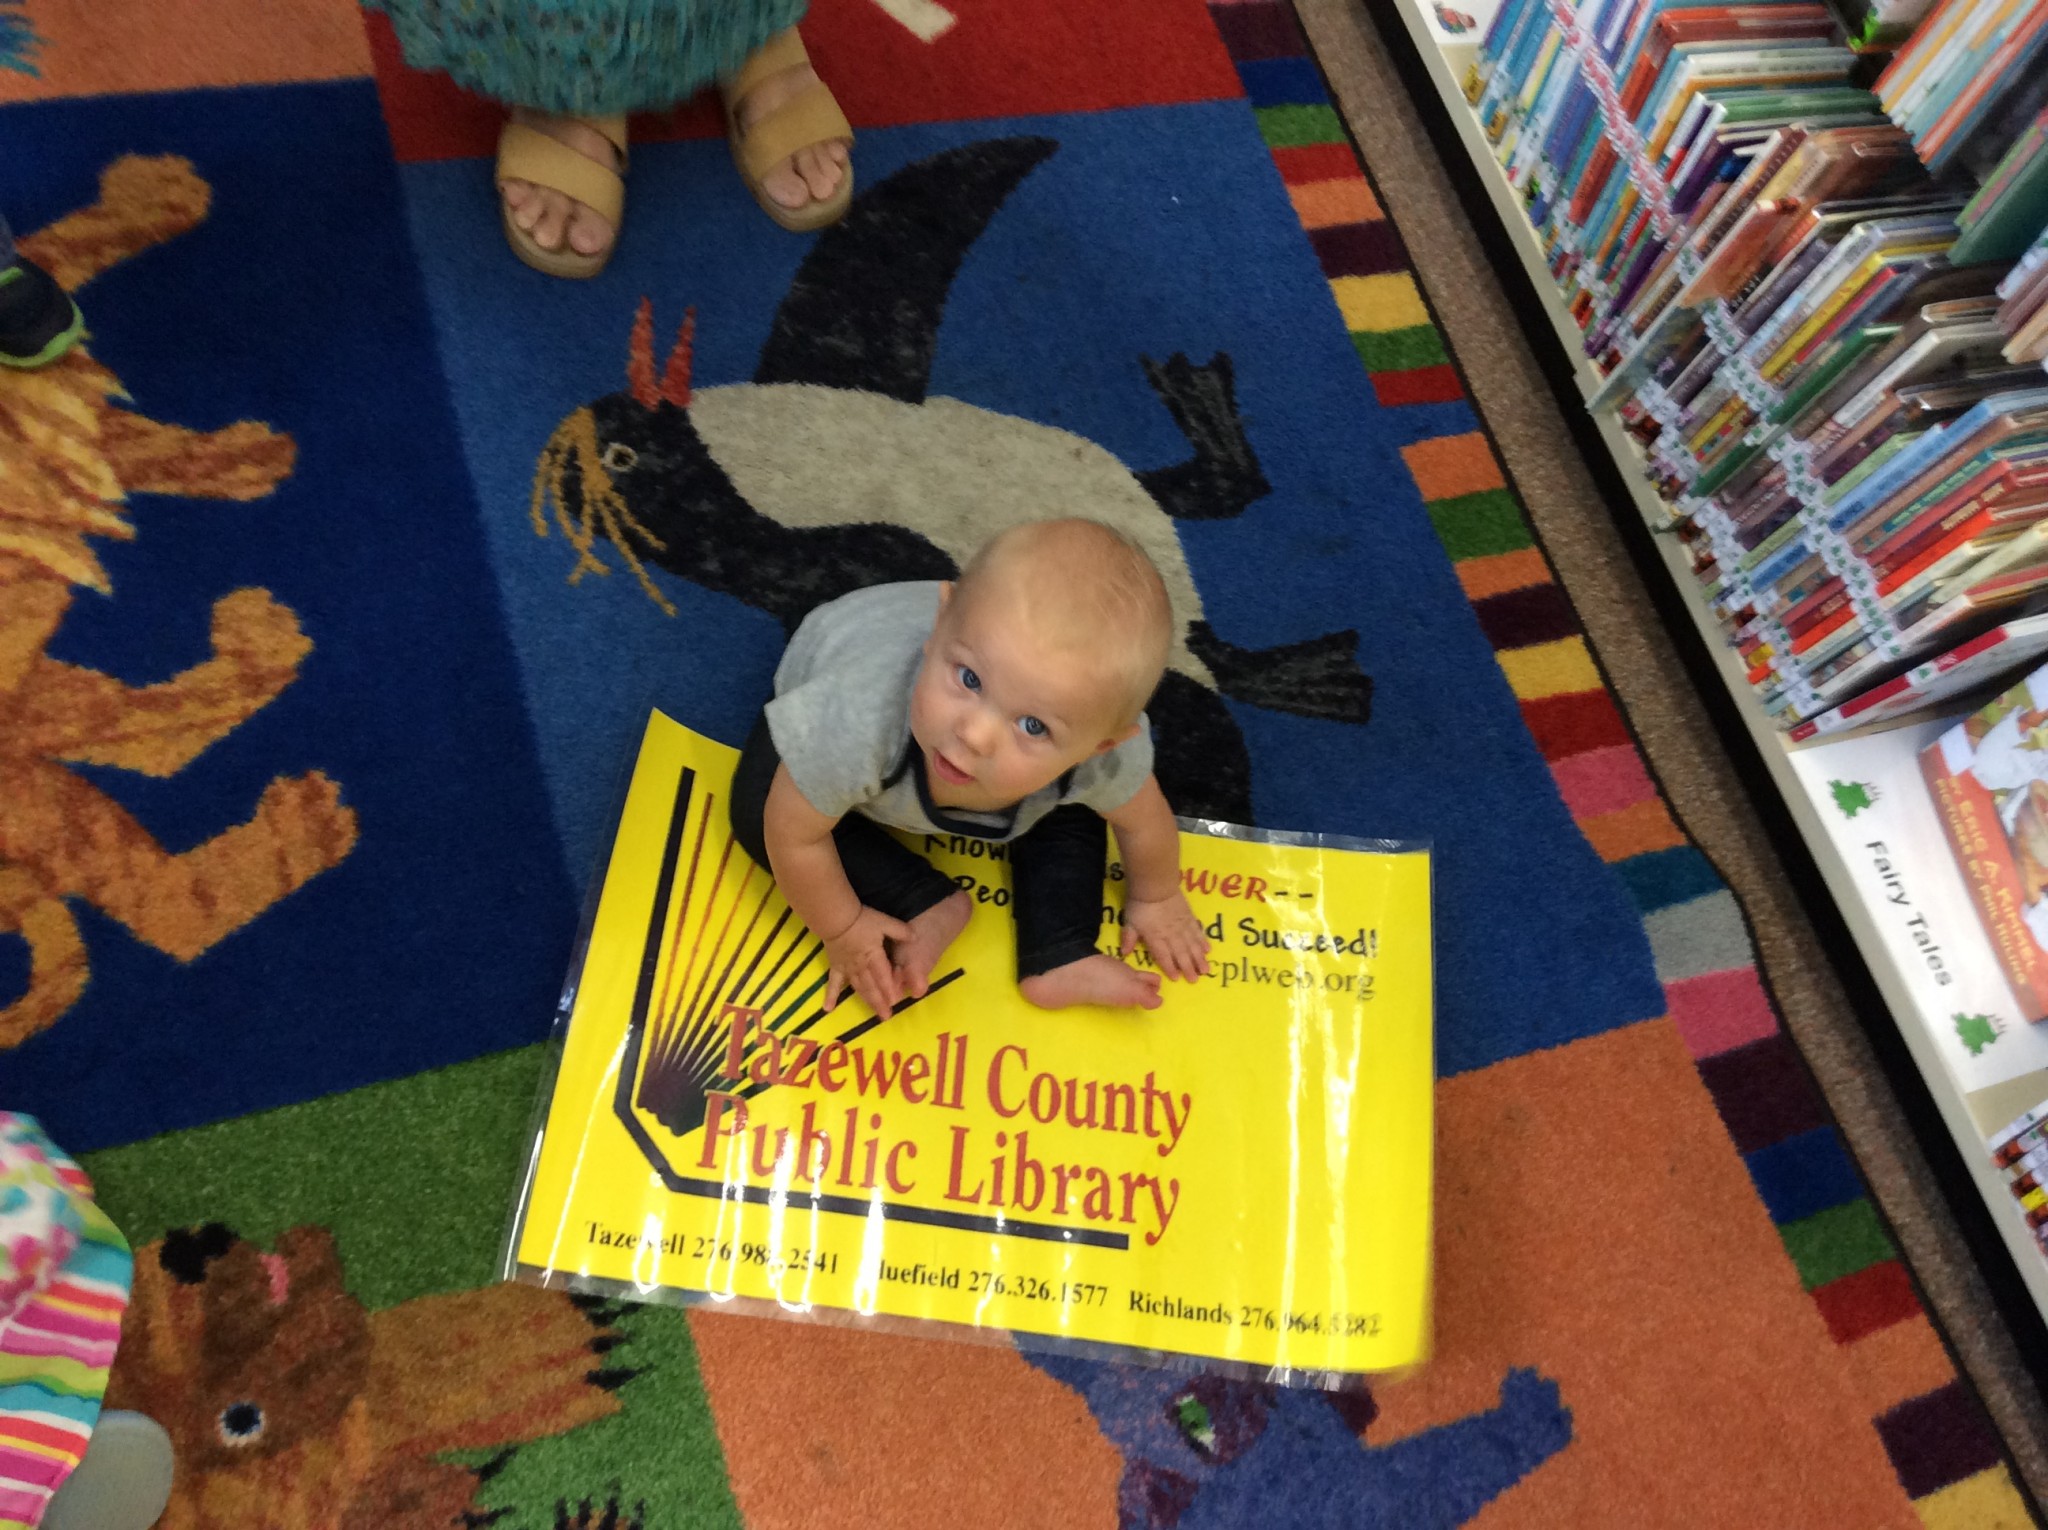 Decorative image of a baby with a large library card